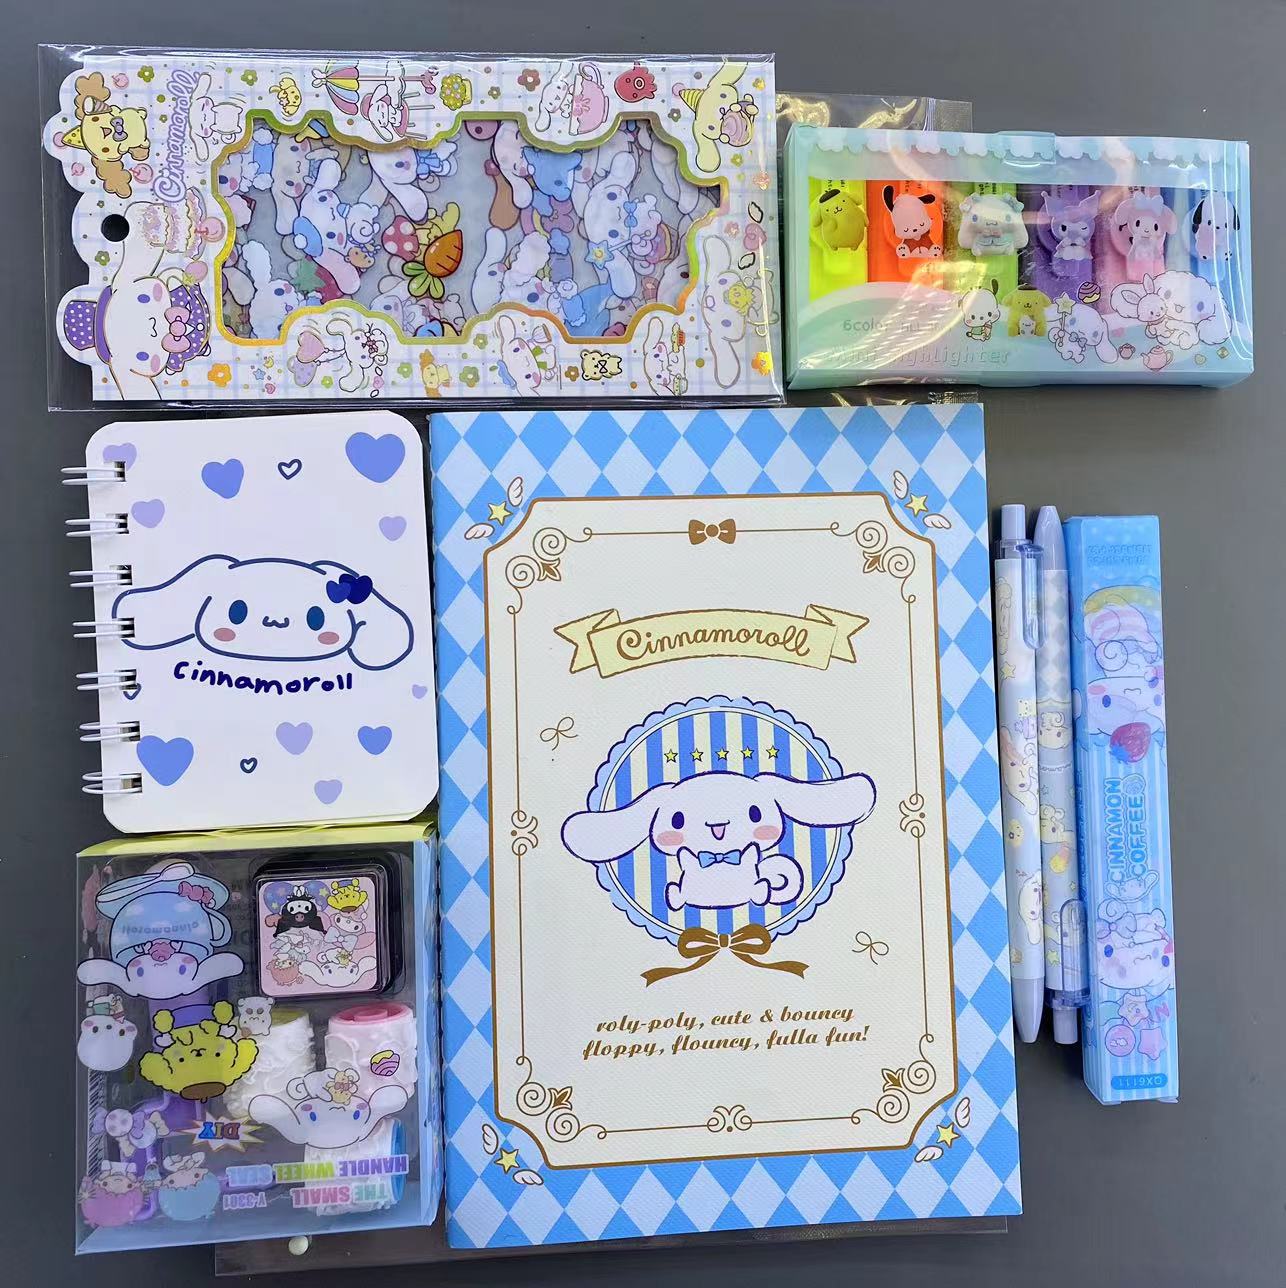 【4】San Stationary Set For Children And Family Pick On Live